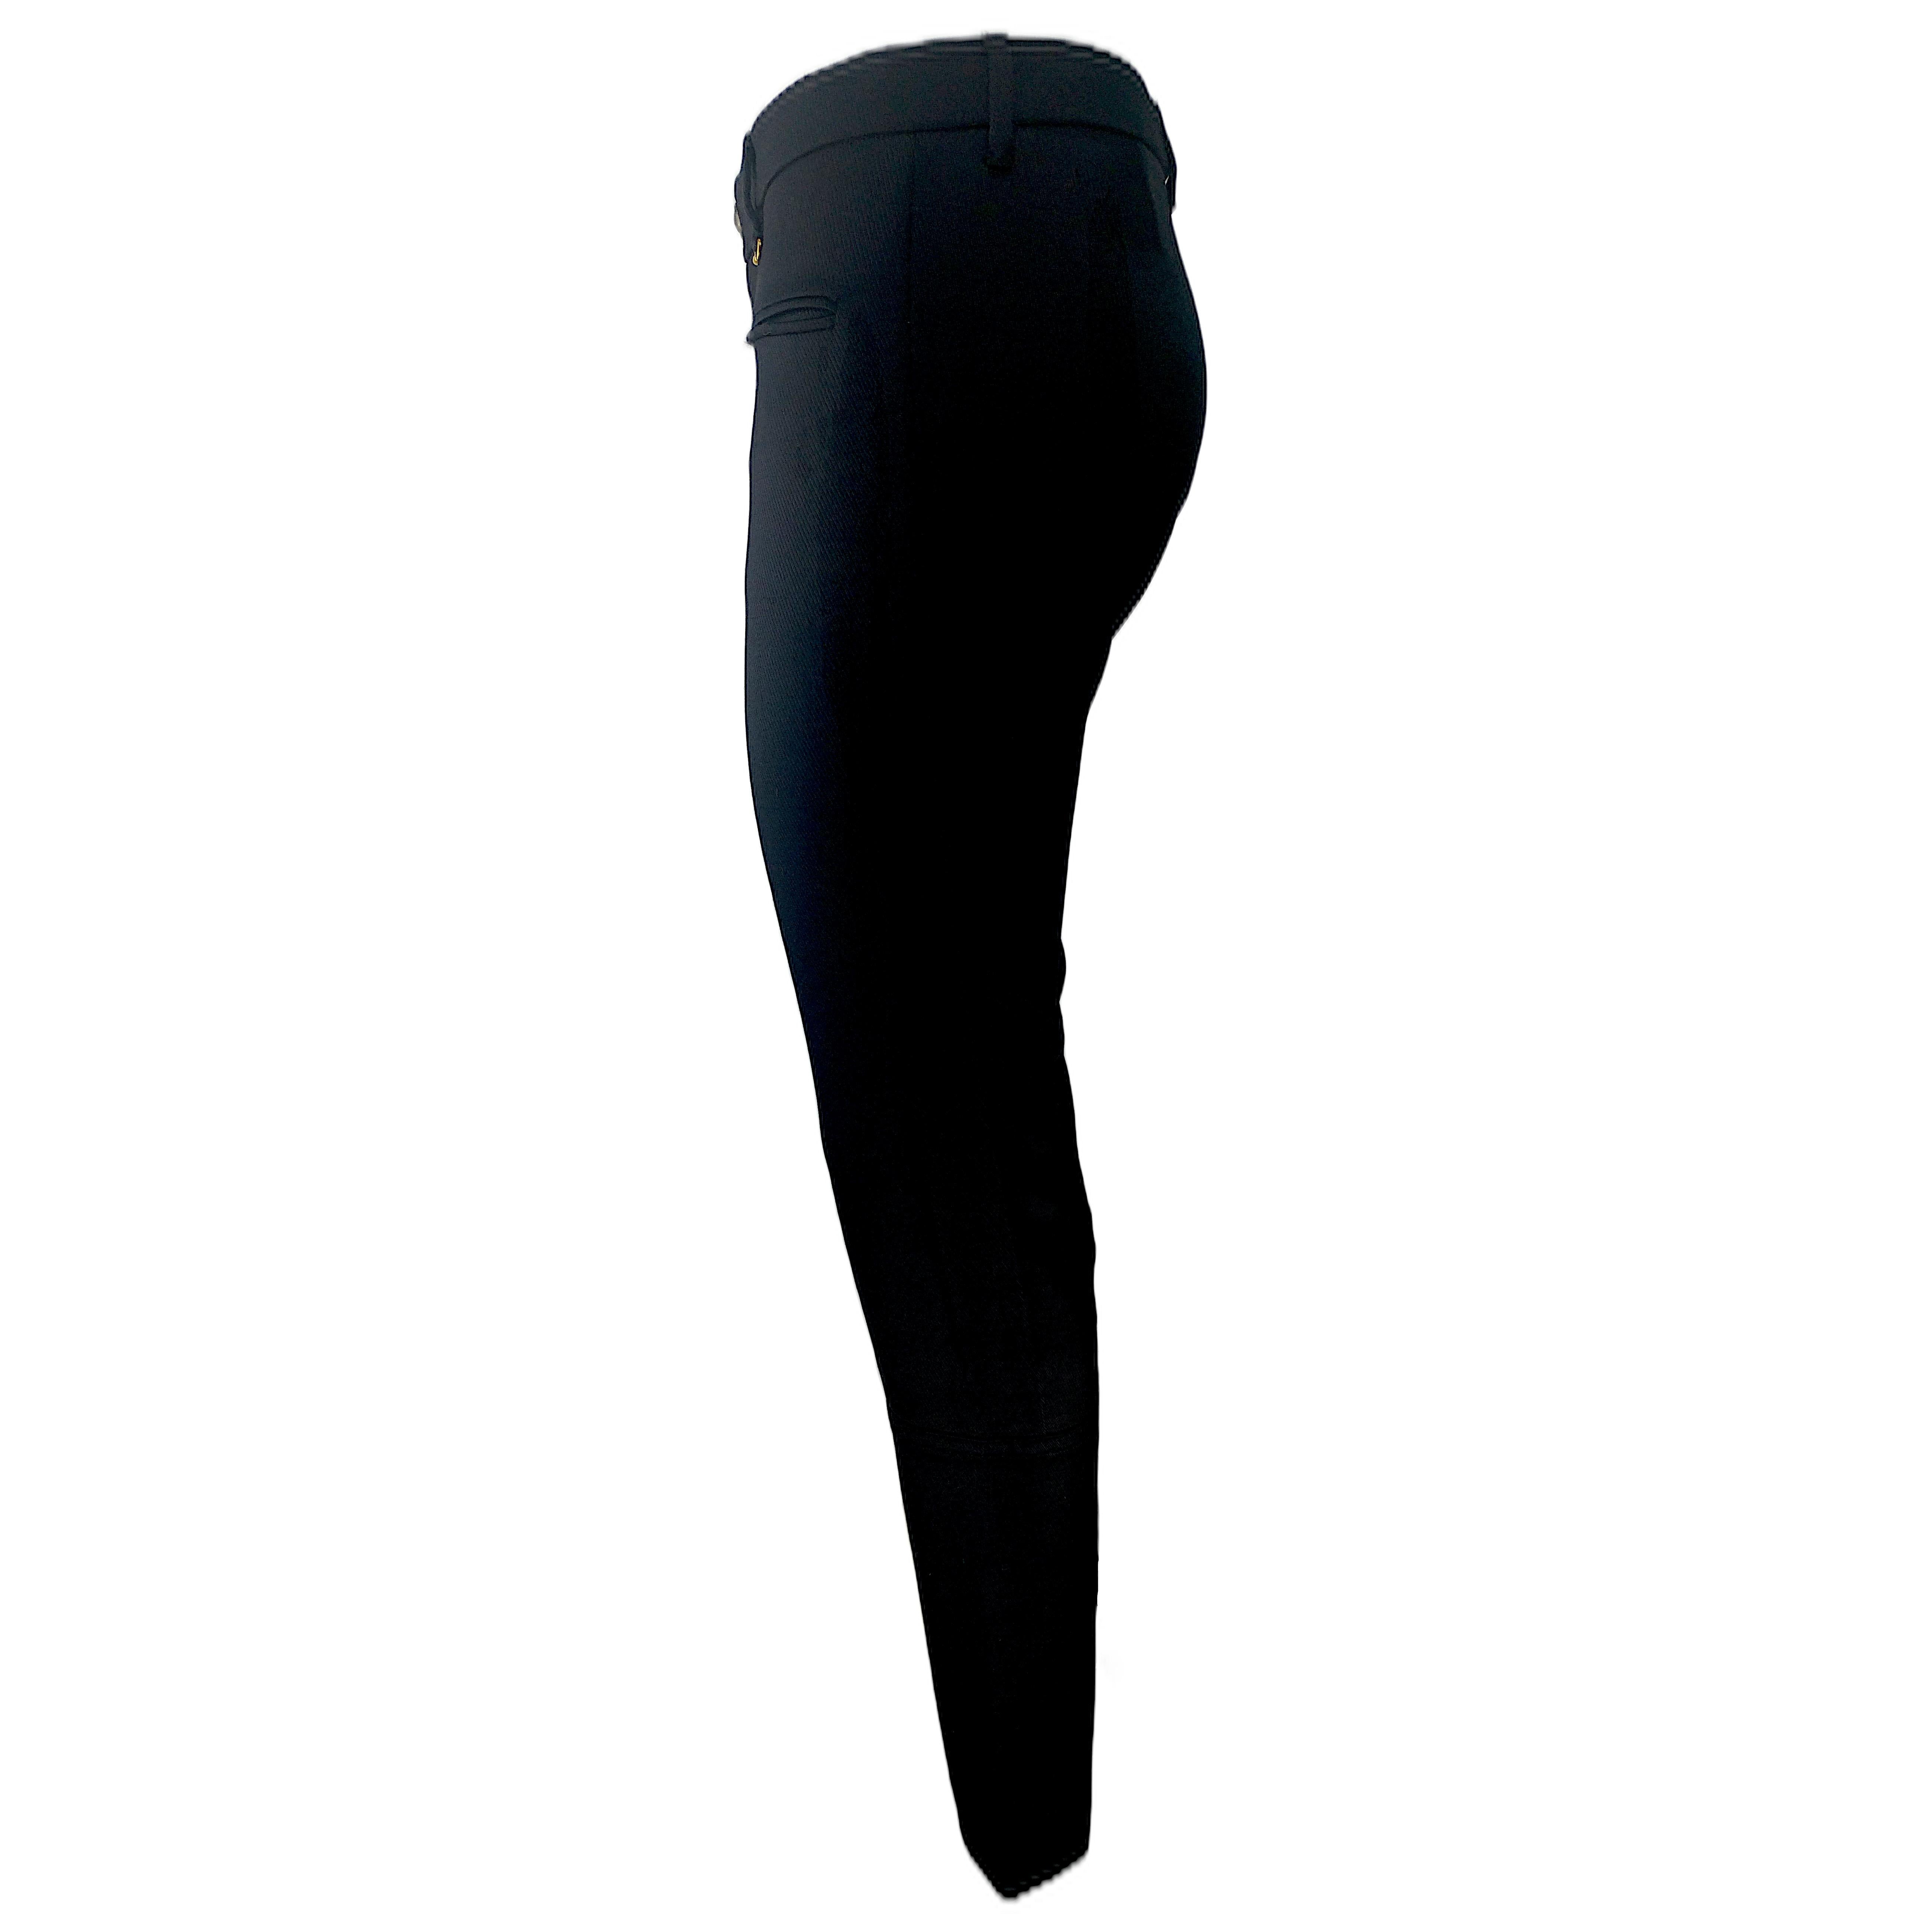 These black pants in equestrian style feature one pocket in the back and two on the front, side zip closures at the bottom hems and patches made of suede leather over the inseam at knee level. The closure has a zip, a button with the Gucci coat of